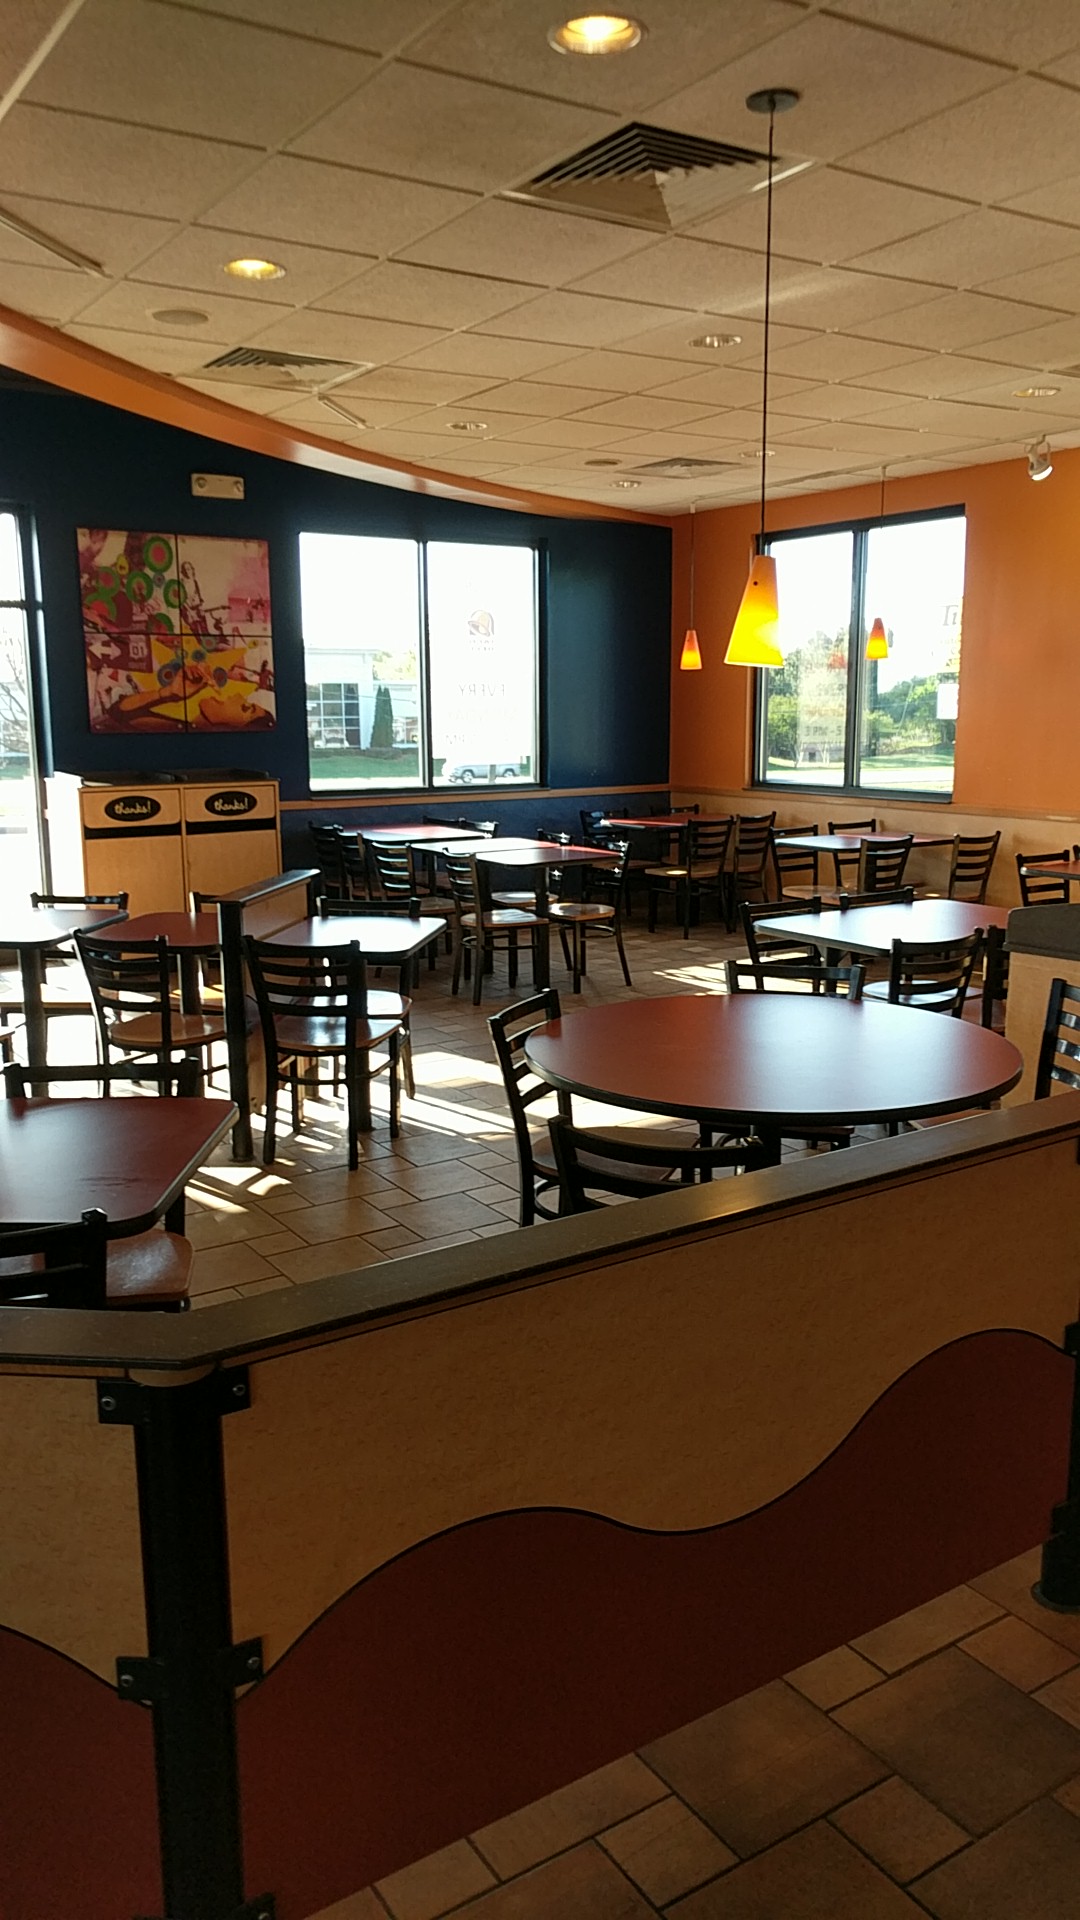 TacoBell Construction Nationwide General Contractor